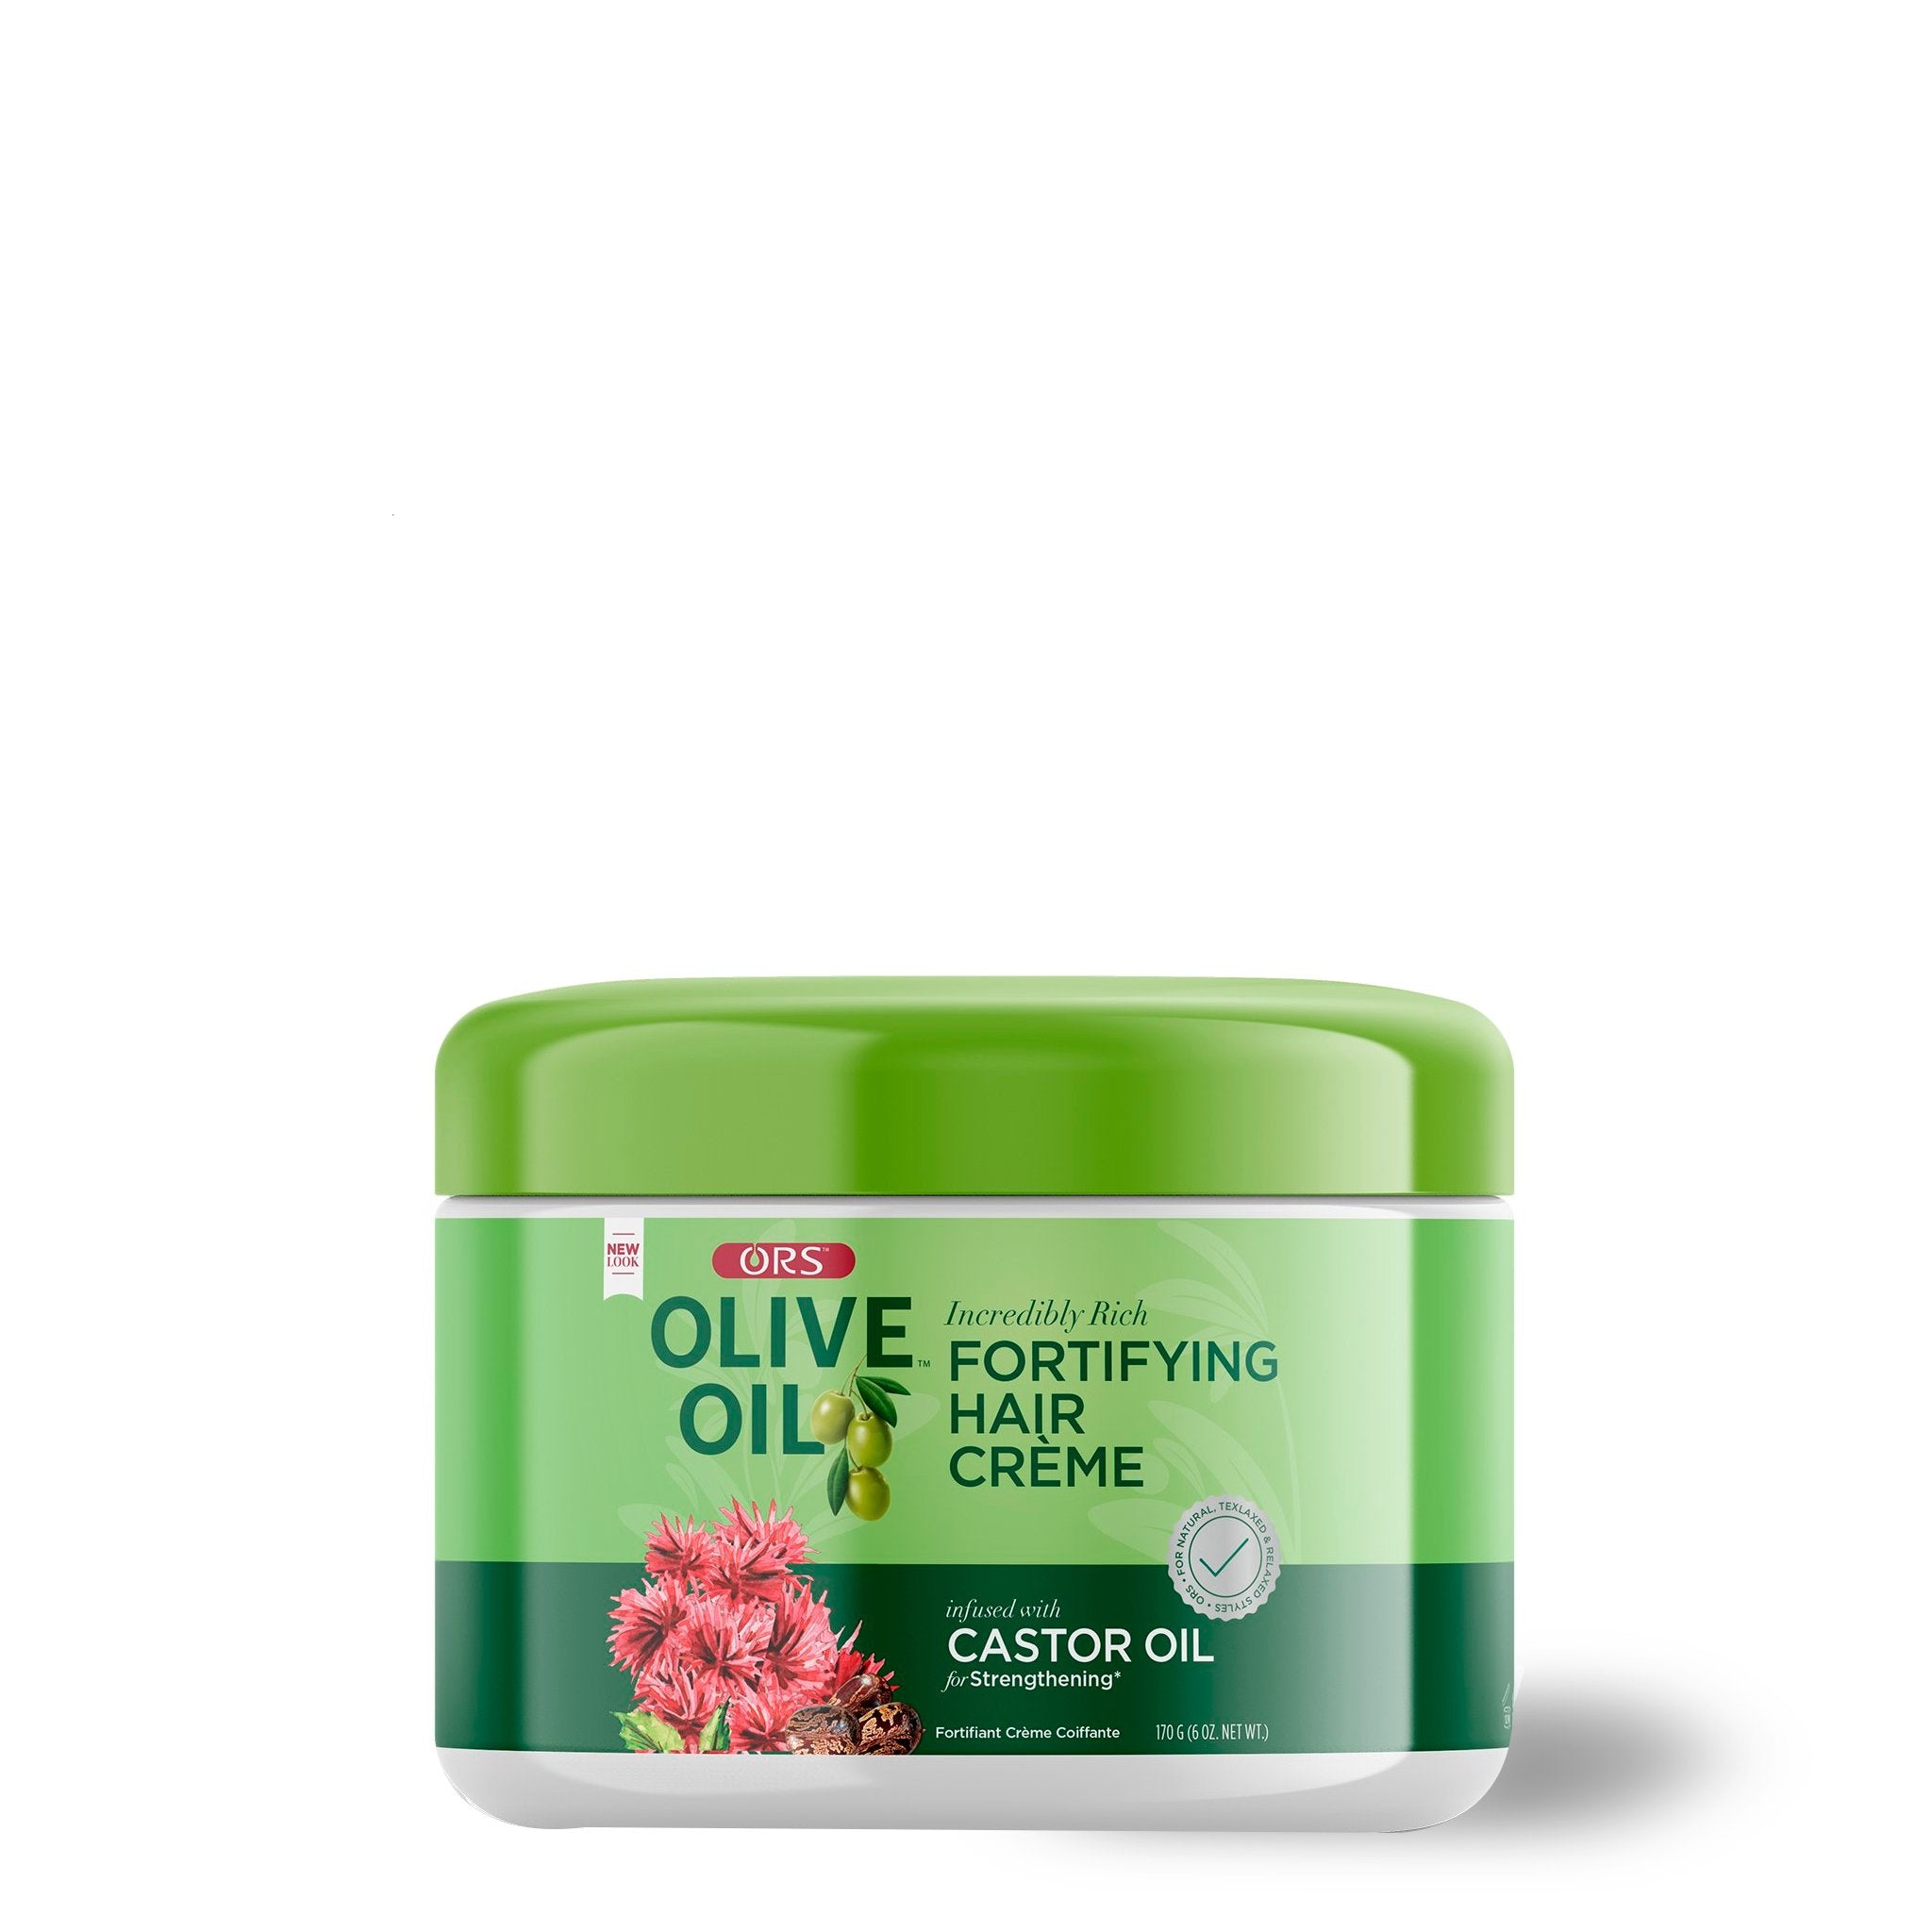 ORS Olive Oil Fortifying Crème Hair Dress, 6 oz